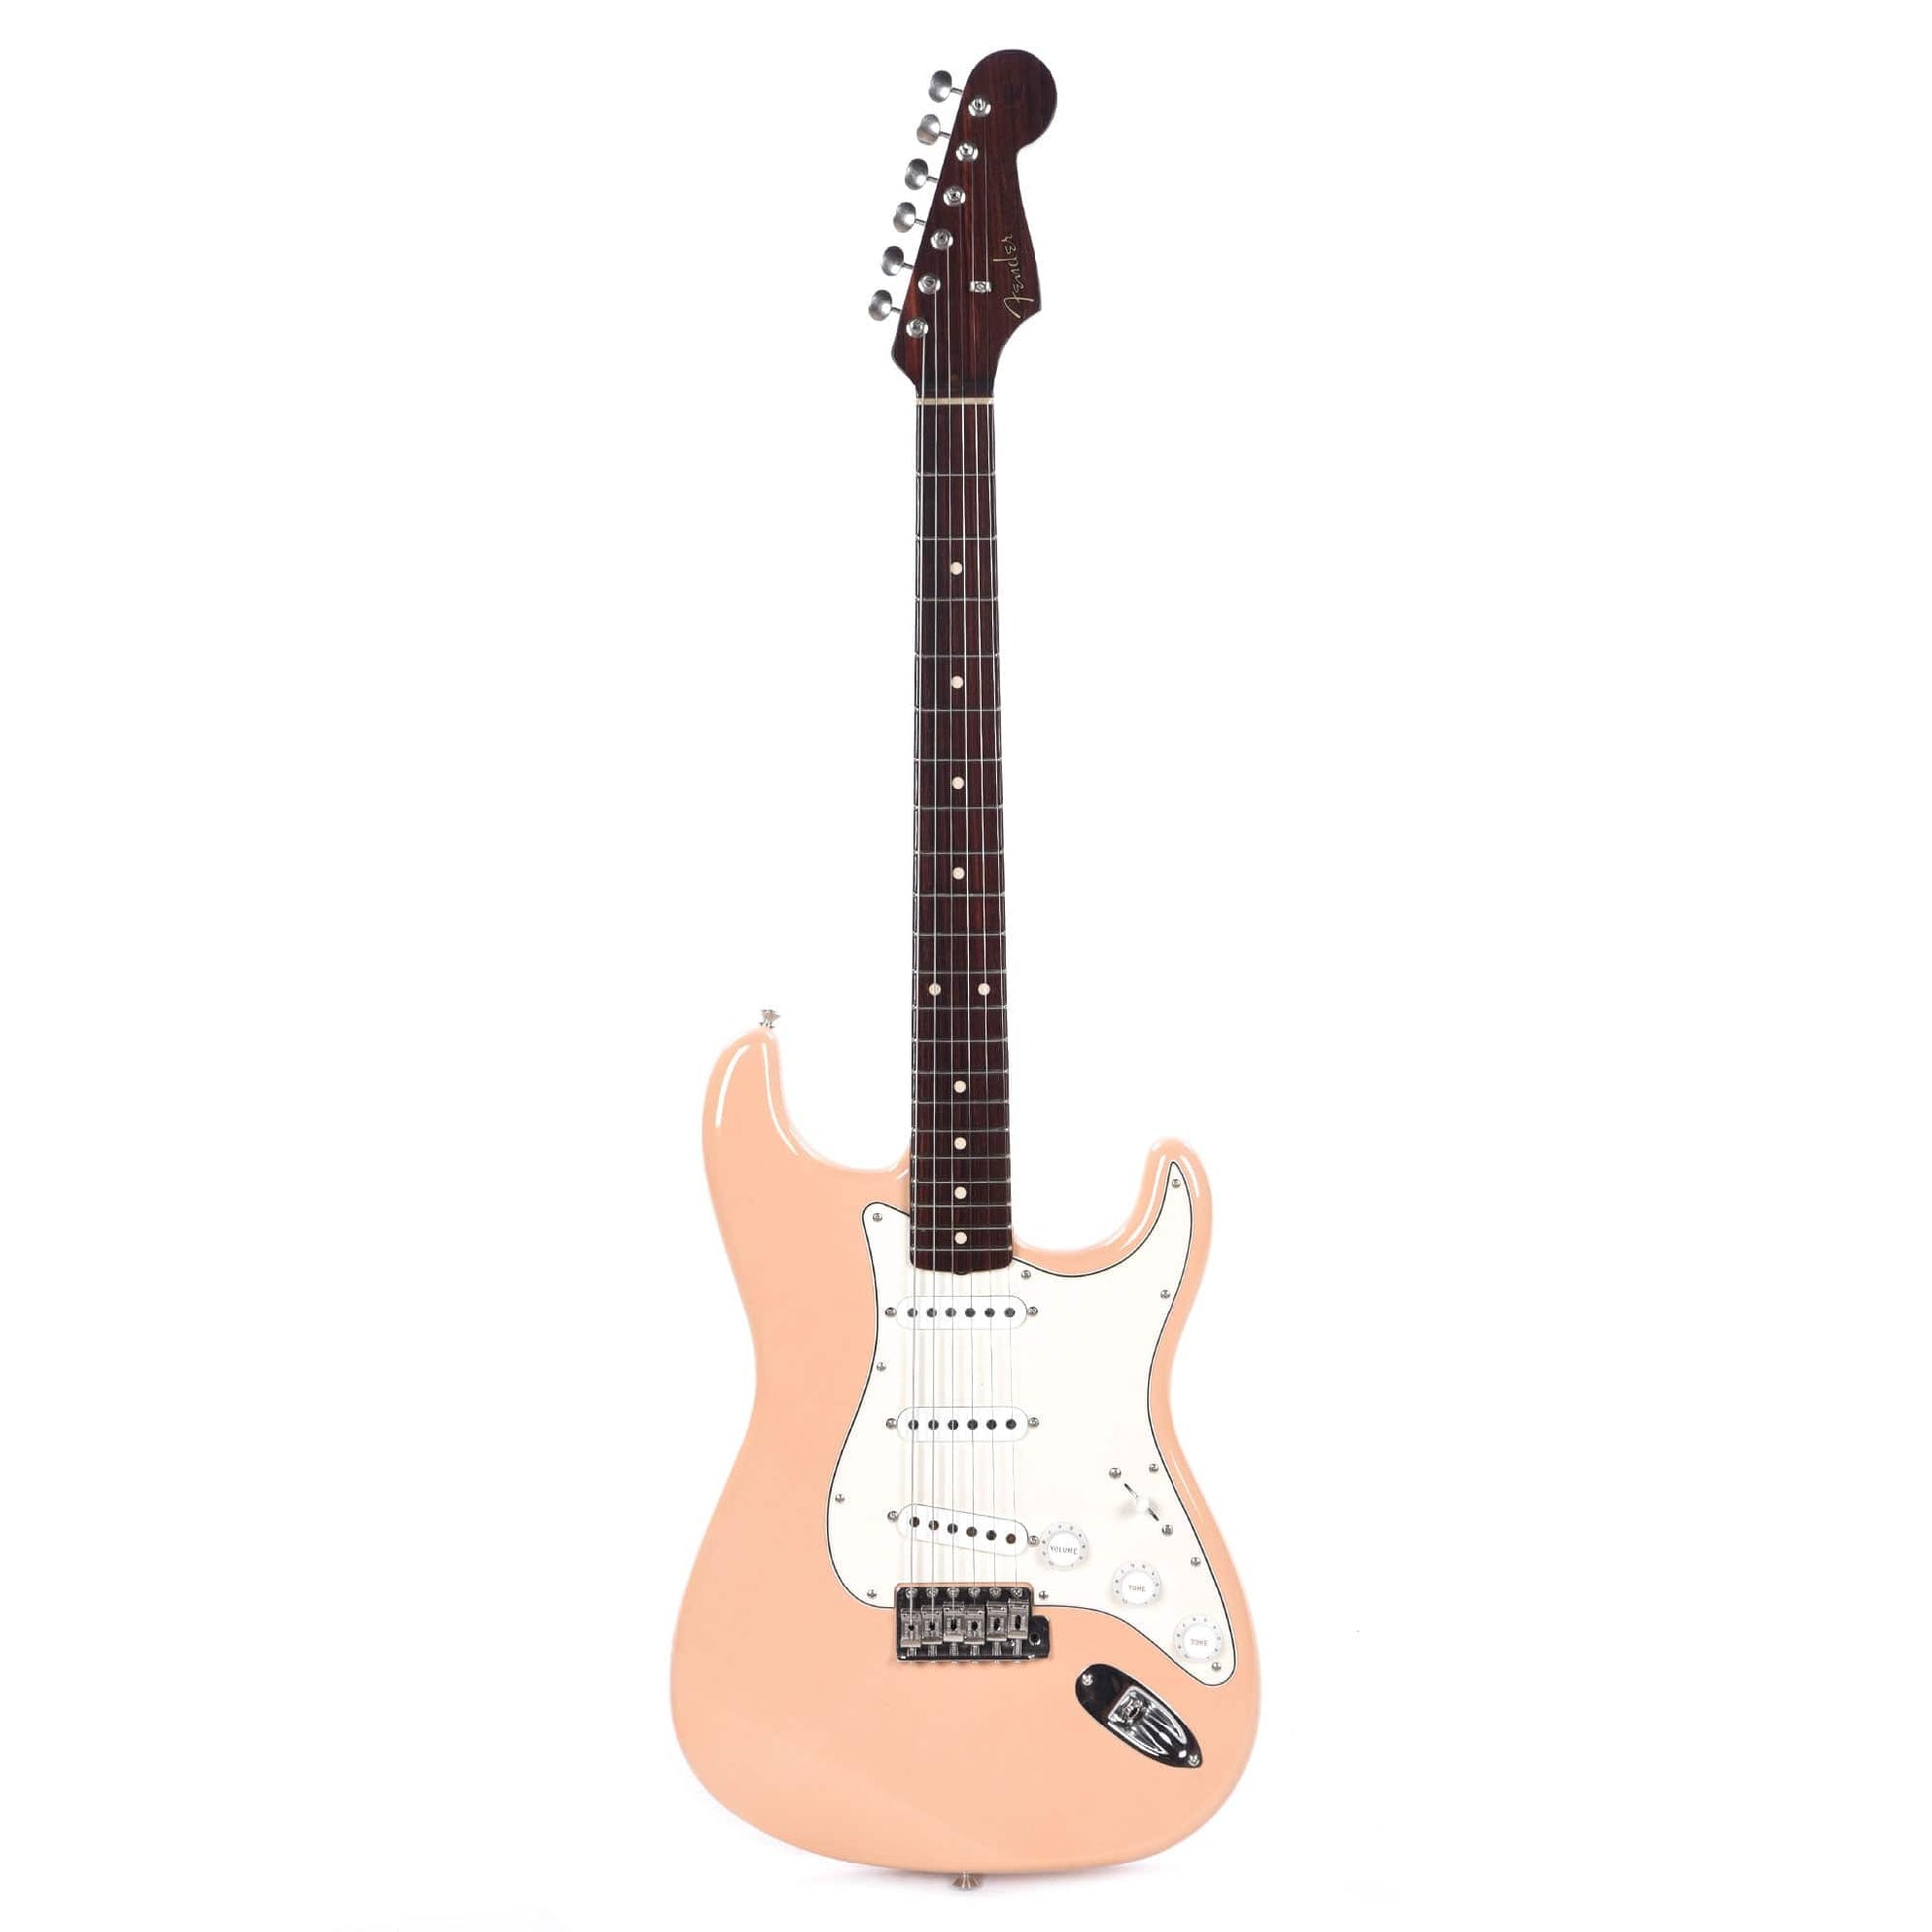 Fender Custom Shop 1959 Stratocaster "Chicago Special" Deluxe Closet Classic Super Duper Aged Shell Pink w/Rosewood Neck Electric Guitars / Solid Body